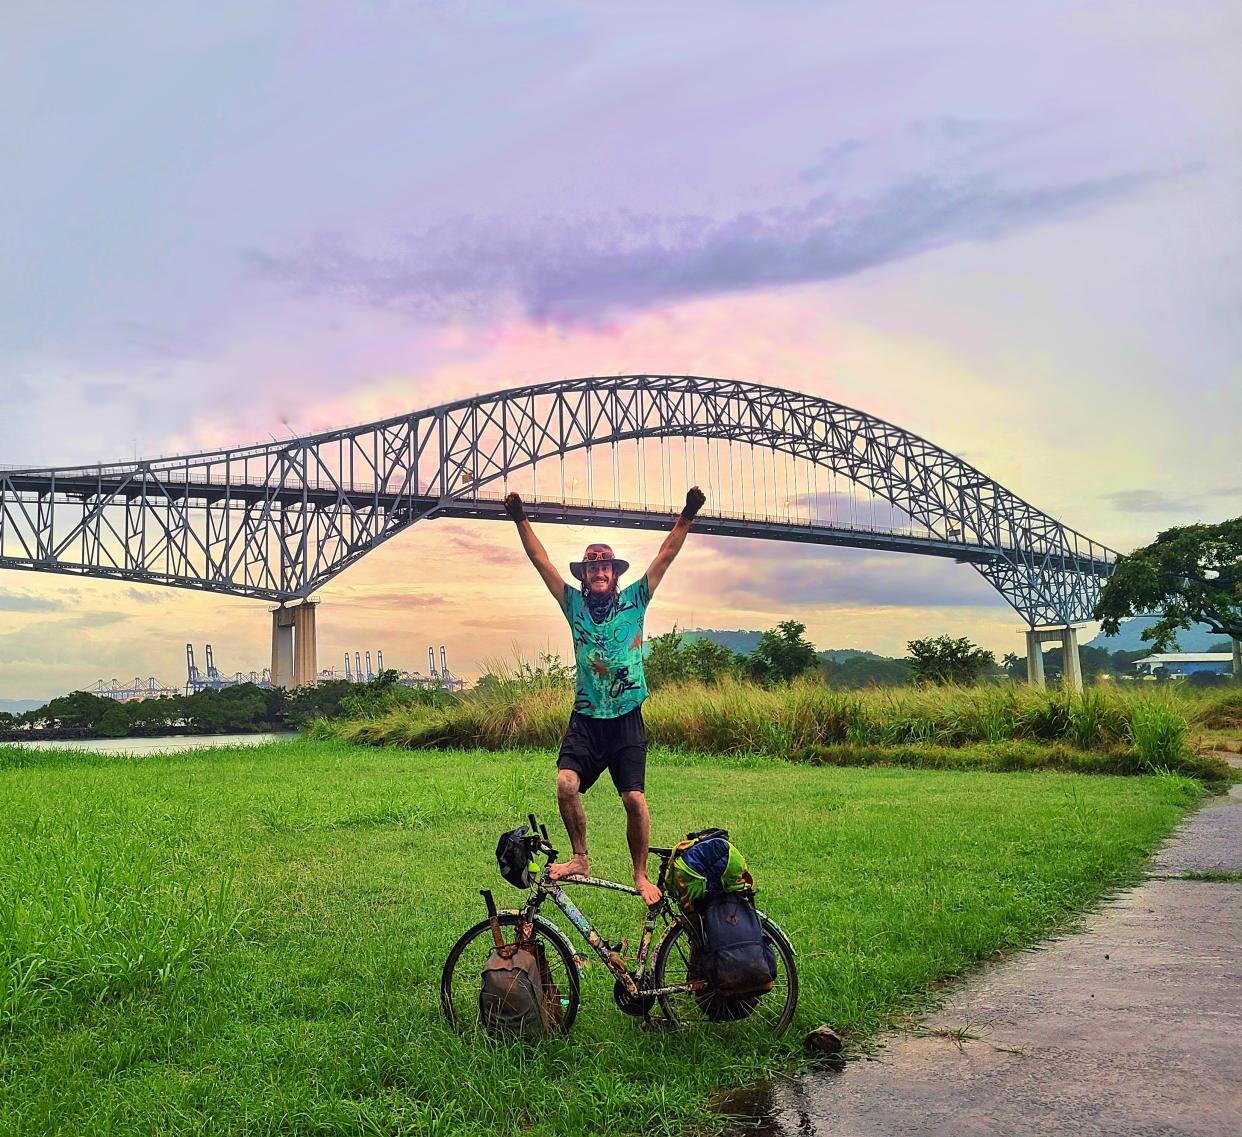 Daniel James of Canton recently completed a solo cycling tour through Central America, starting in Texas and ending in Panama. James did the trip while riding barefoot.